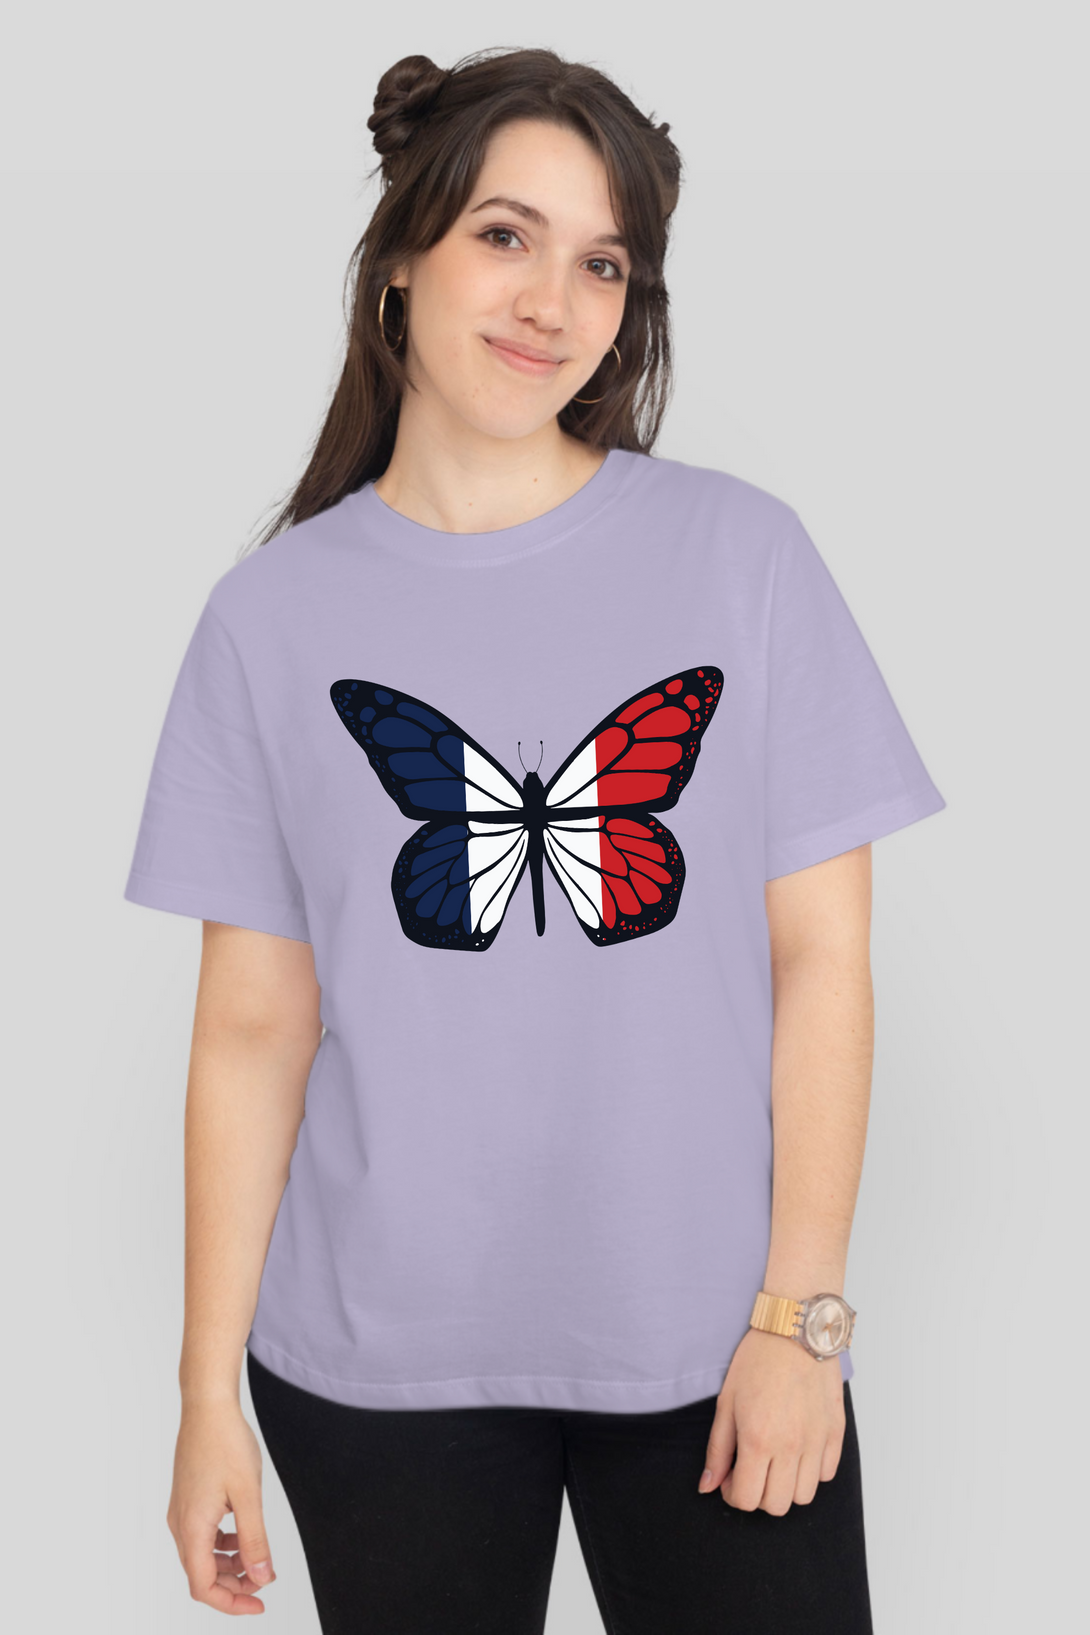 French Butterfly Printed T-Shirt For Women - WowWaves - 9